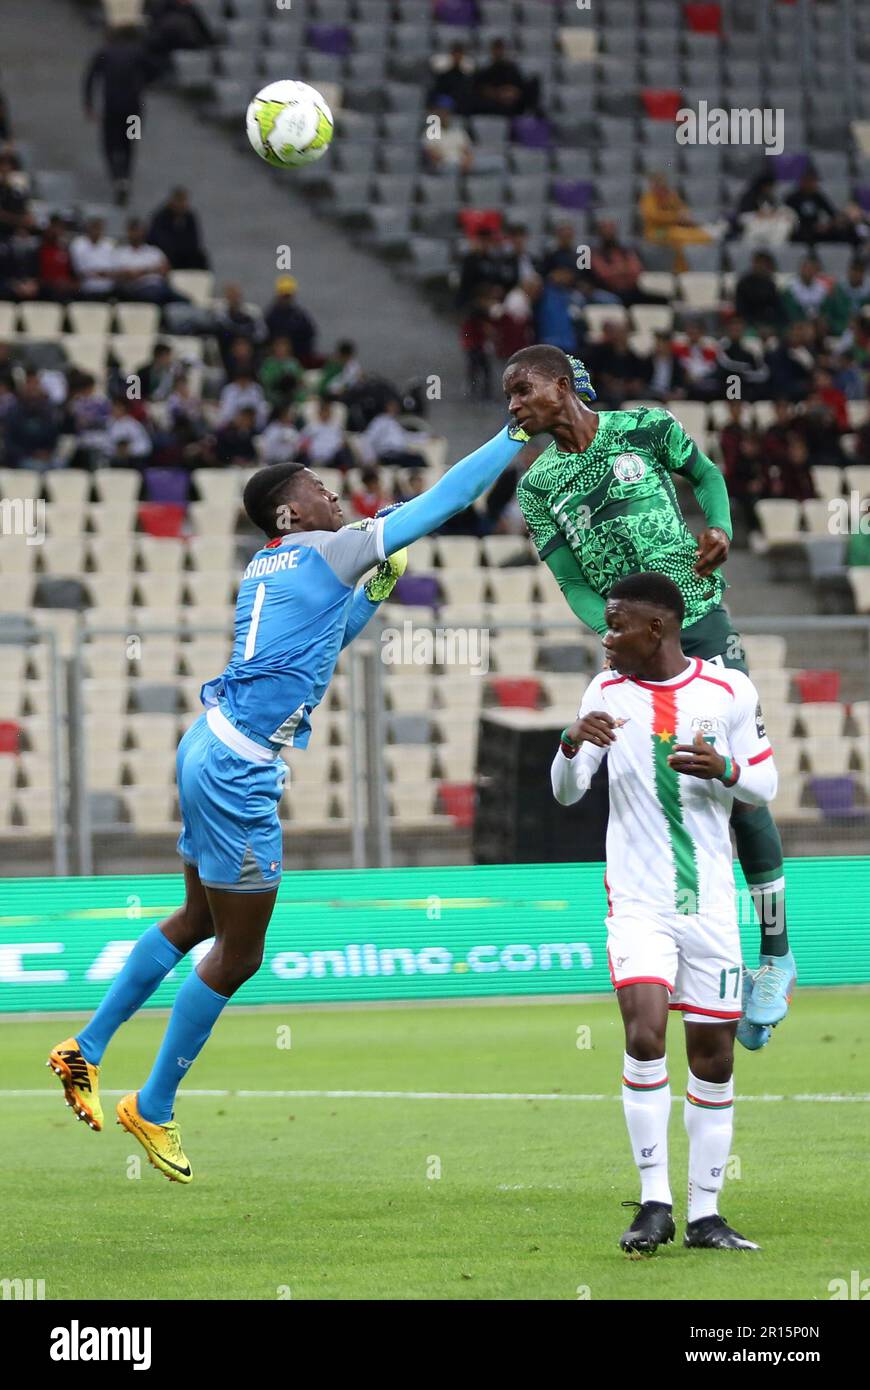 Algiers. 12th May, 2023. Burkina Faso's goalkeeper Mohamed Traore (L) vies with Nigeria's Abubakar Abdullahi during the U17 Africa Cup of Nations quarterfinal match between Nigeria and Burkina Faso in Algiers, Algeria, May 11, 2023. Credit: Xinhua/Alamy Live News Stock Photo